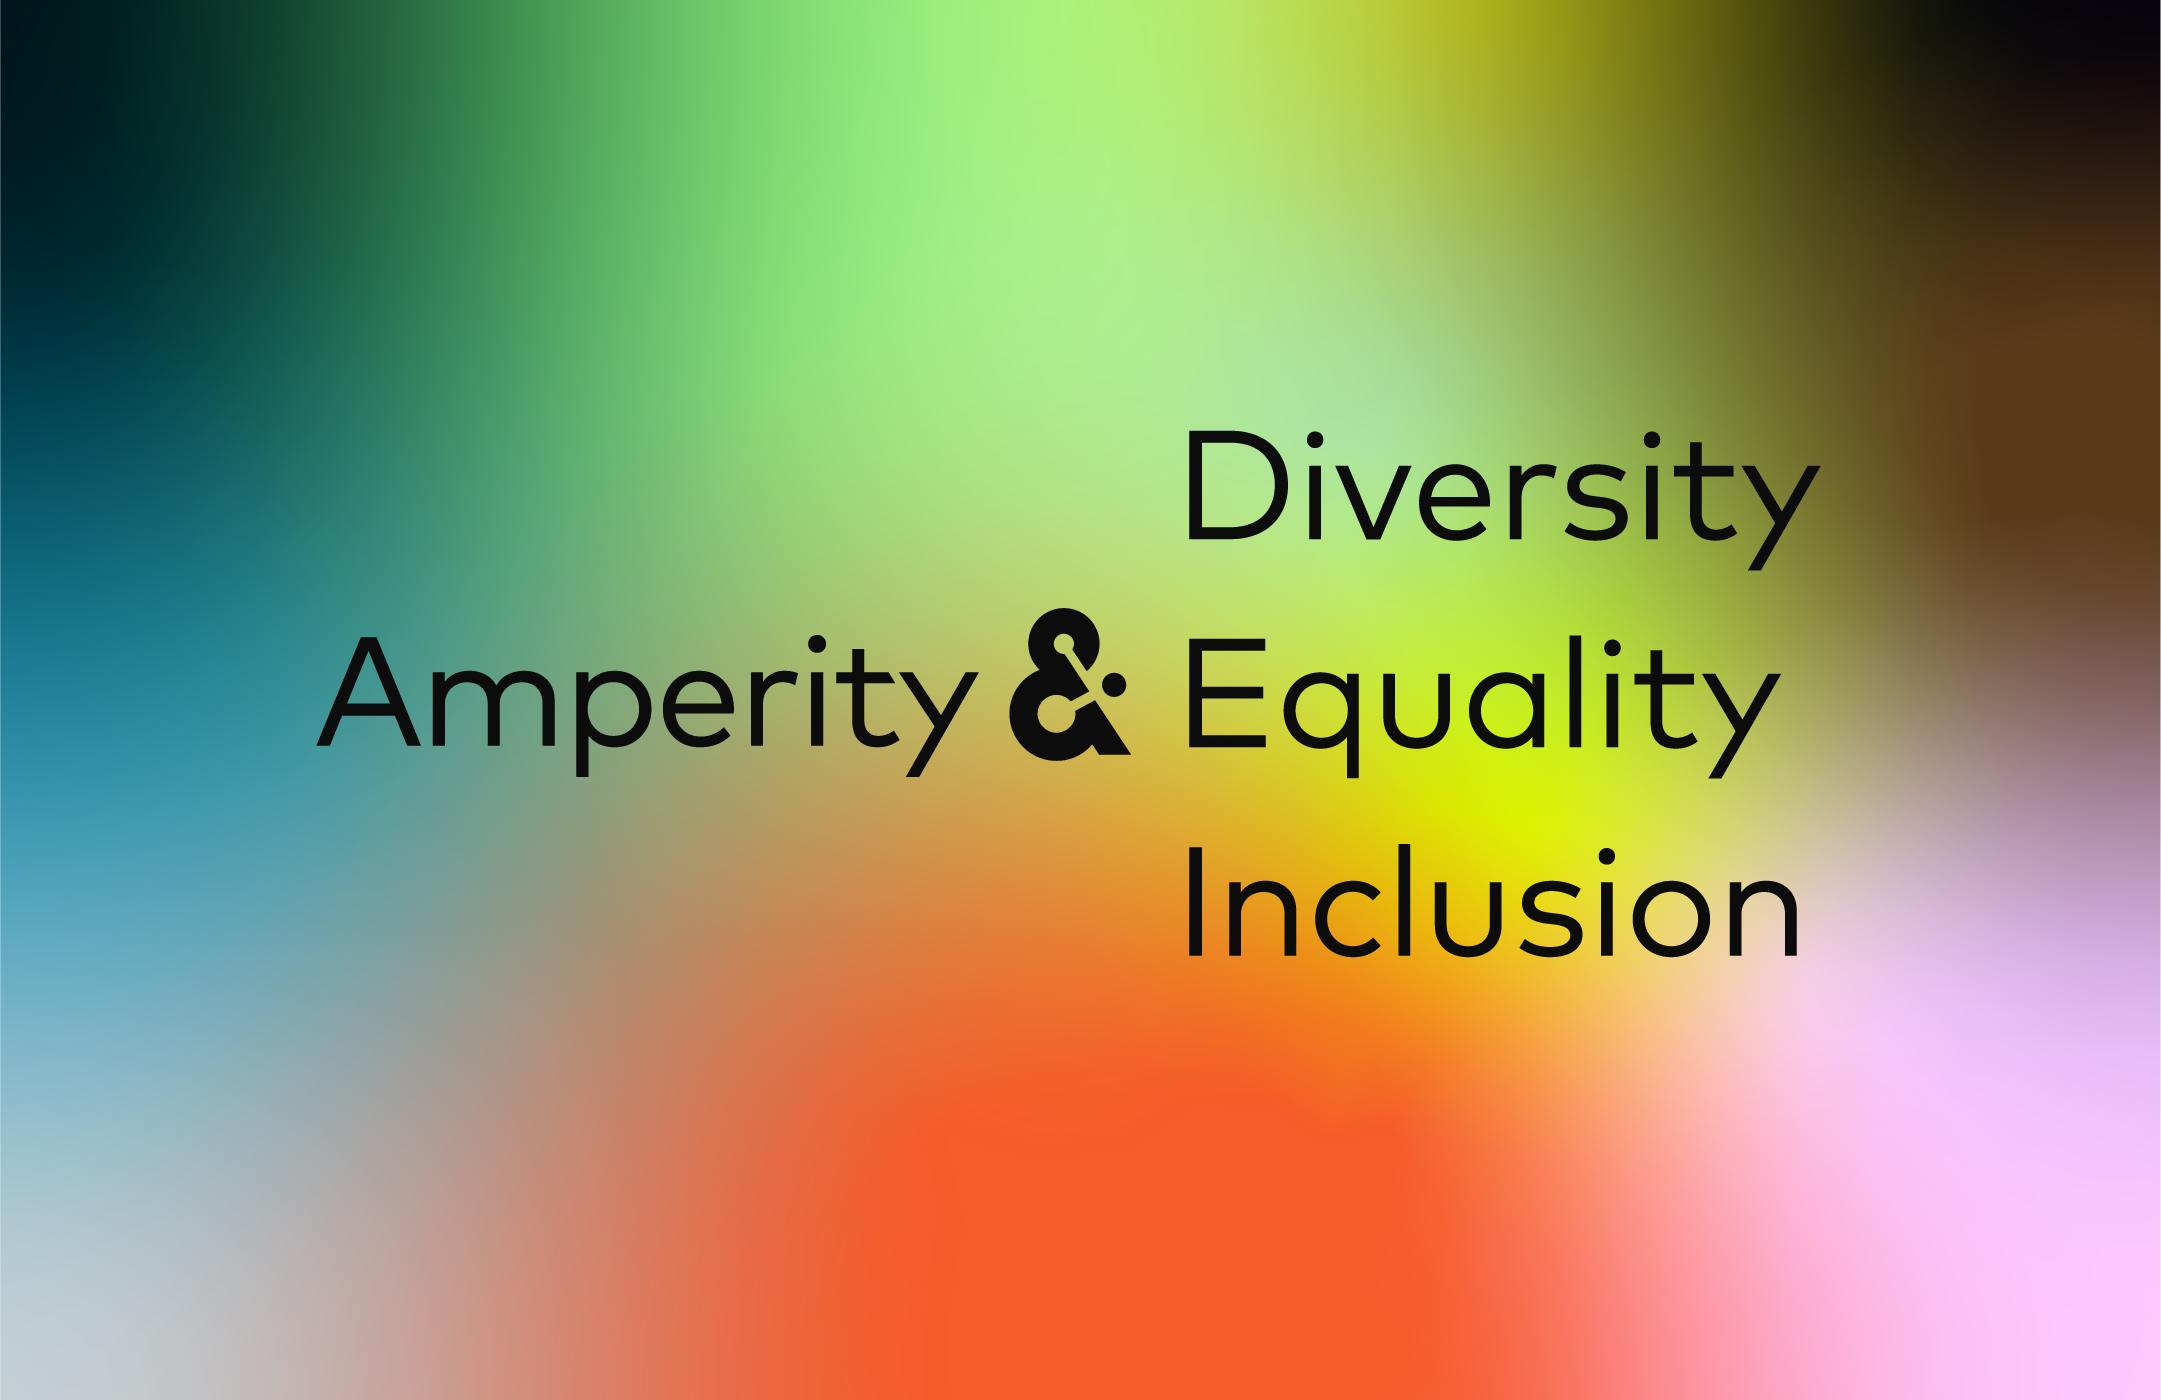 Amperity Diversity, Equality, & Inclusion. 